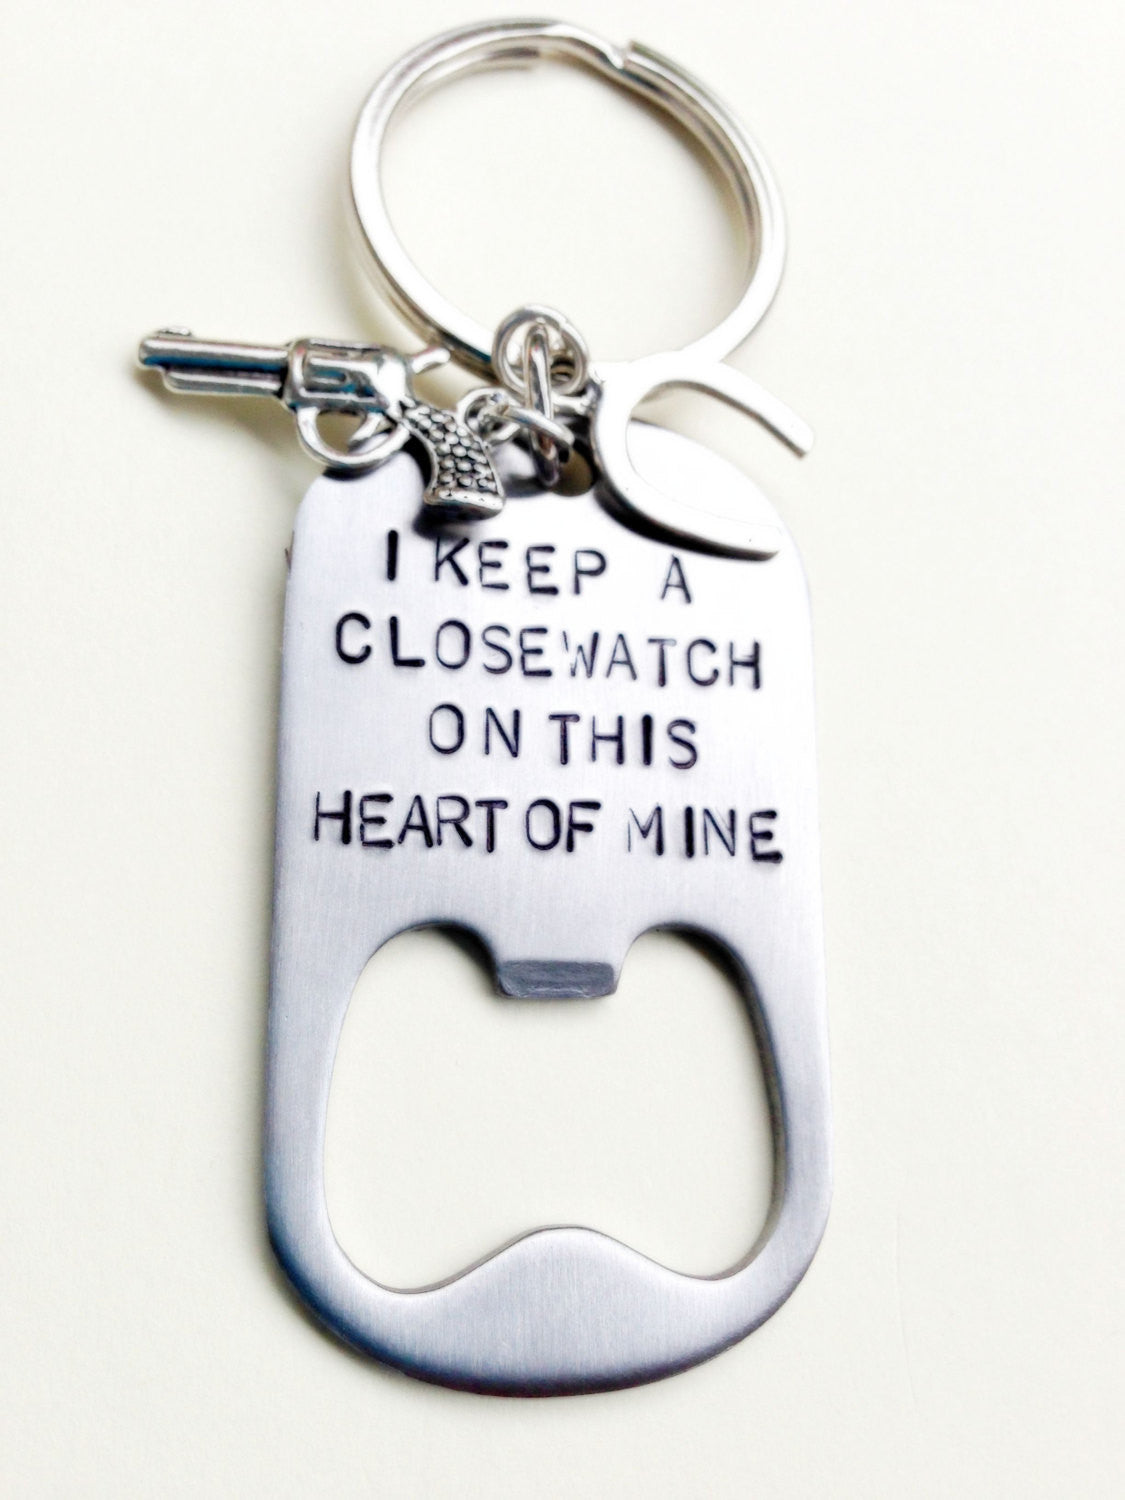 johnny cash, i keep a close watch on this heart of mine, bottle opener key chain,personalized key chains, gifts for men - Natashaaloha, jewelry, bracelets, necklace, keychains, fishing lures, gifts for men, charms, personalized, 